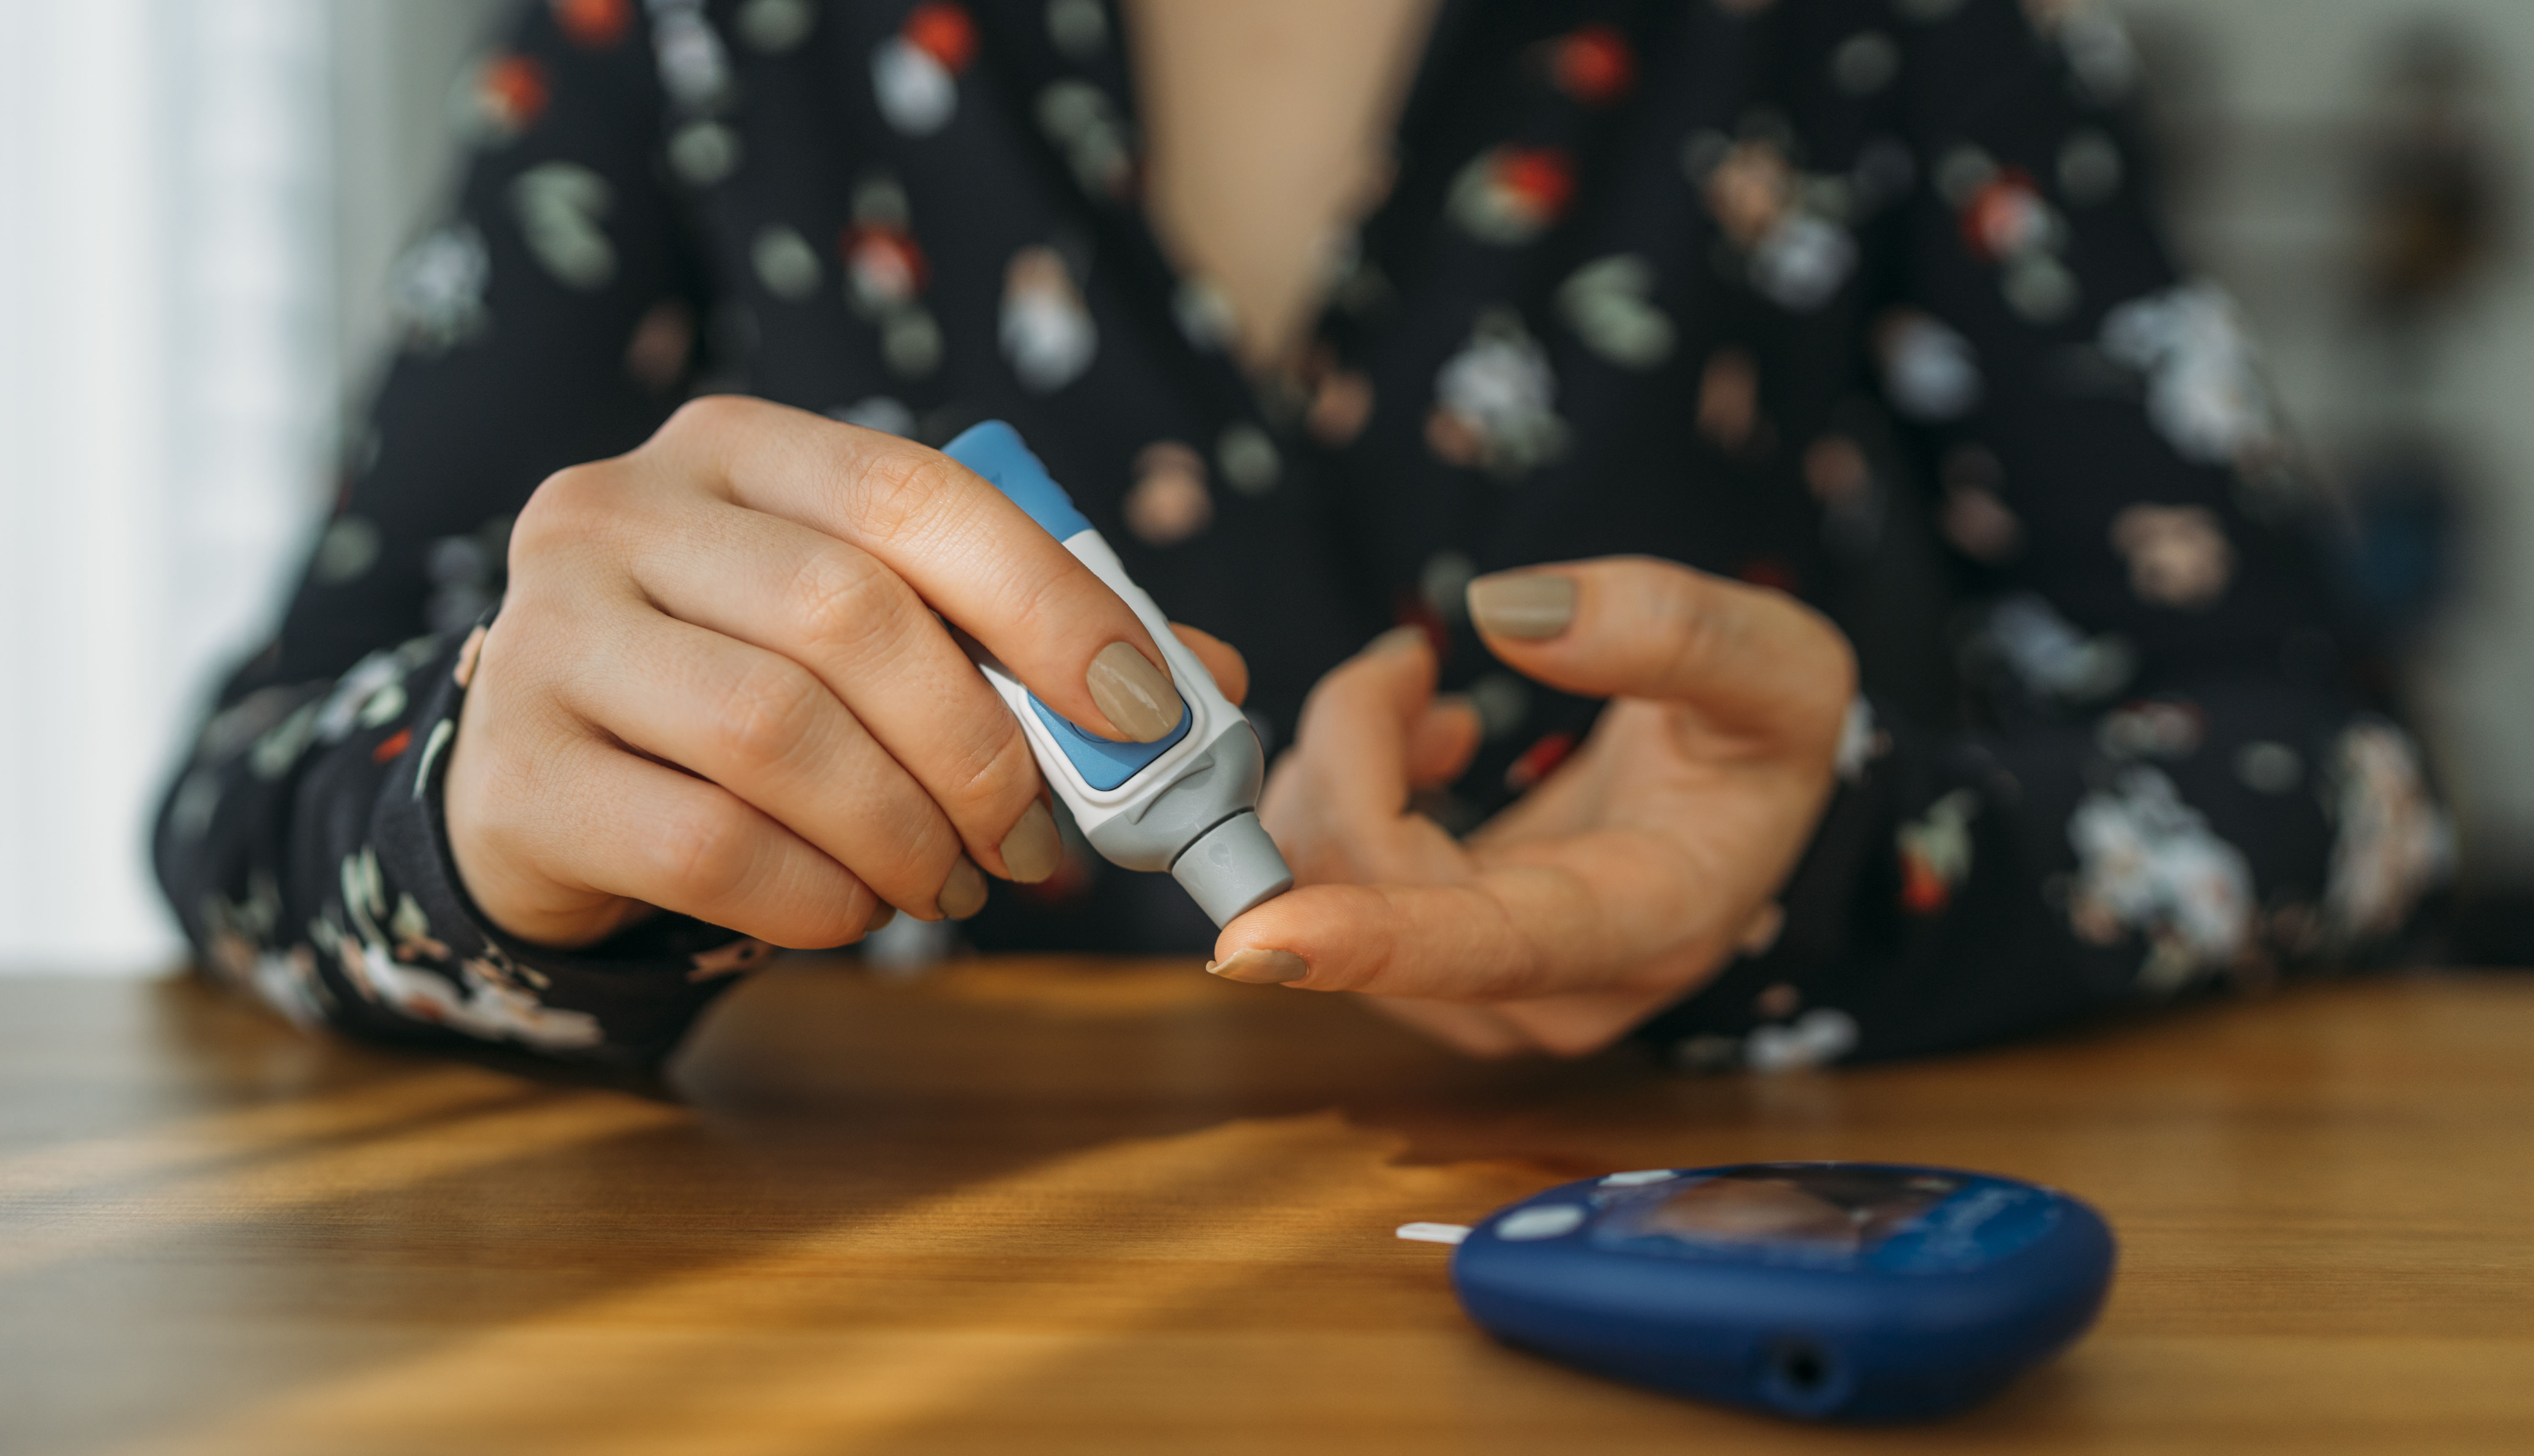 A person measuring their blood glucose